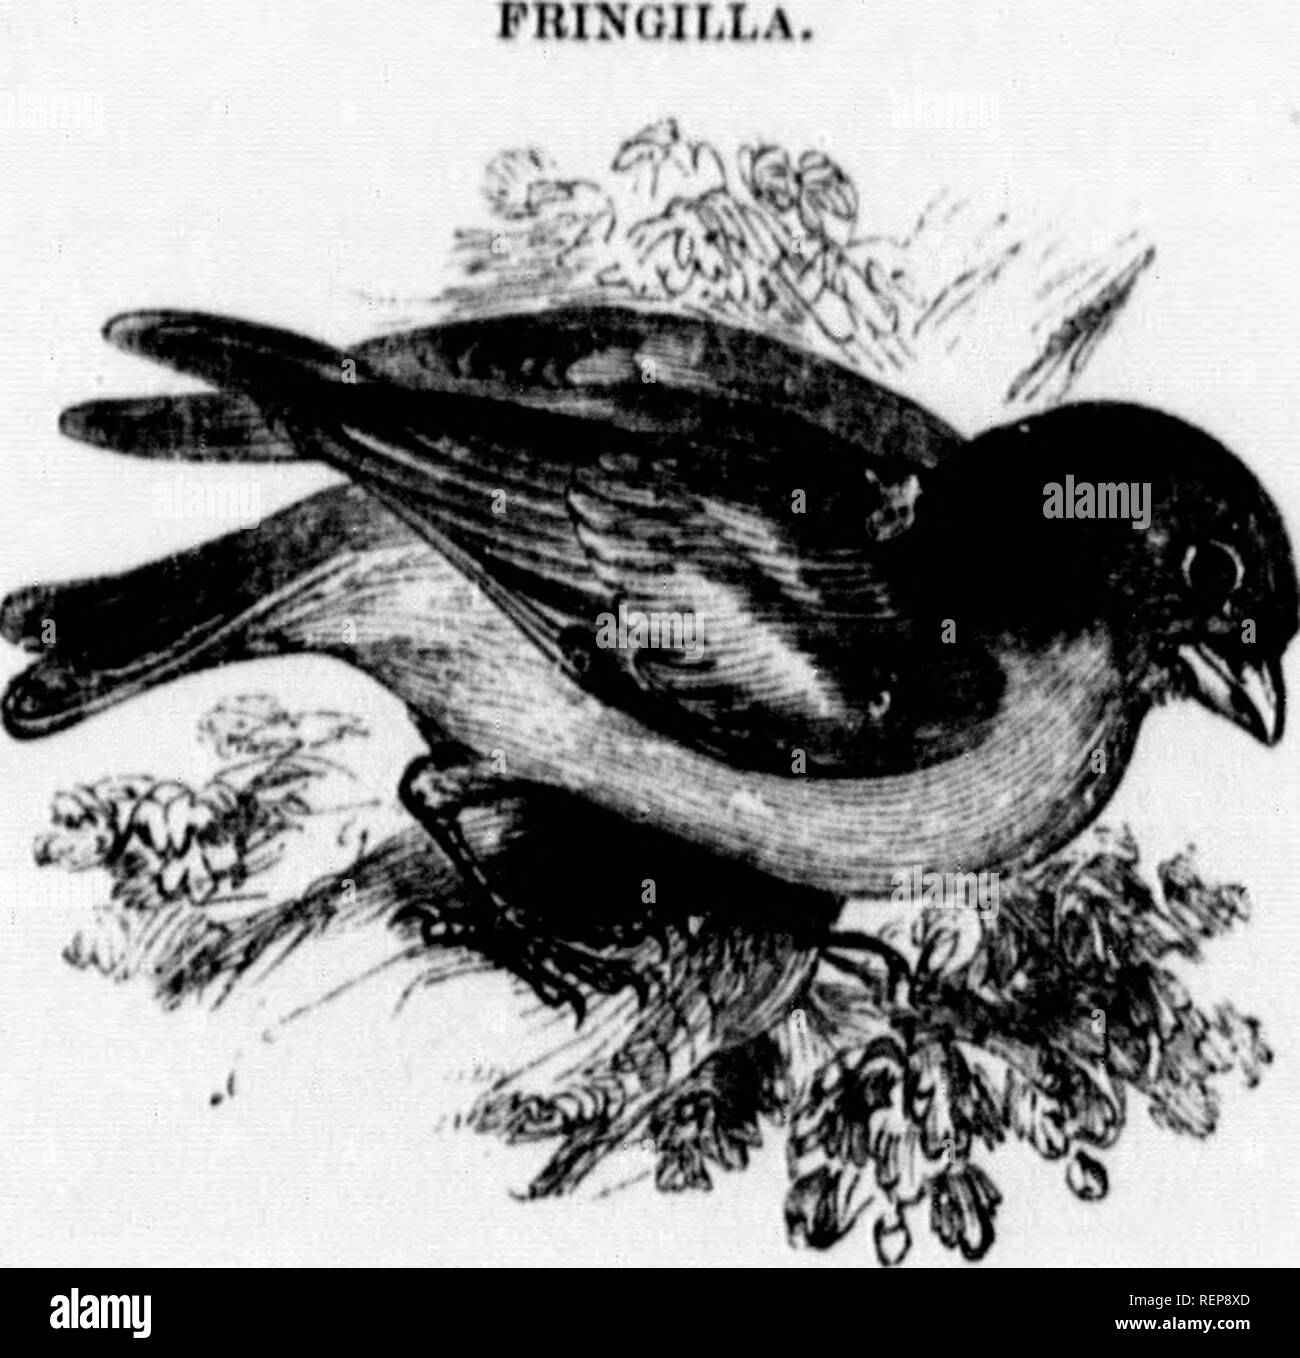 . The illustrated natural history [microform]. Natural history; Sciences naturelles. '2HR NATLHAL IIISTOnV. &quot;Tho Smkin is ii common bird in nil the iii&gt;:li |iurtM of AlieidL'ciishiro, wliich uhouud in fir-woodH. Thoy kmii&lt;i jjoucnilly near tlio extroiuiticH of tho linvnciics of tall fir-trecH, or near tho Hummit of the tree. Sometimes tho nest is found in |)lantatiouH of younj^ fir-wood. In one instance I m«t witli a nest not thrco feet from tlvo gi-oimd. I visited it every day until four or five e^gH were deposited. During; incubation tlio femulo showed no fear at my aiiproacL On b Stock Photo